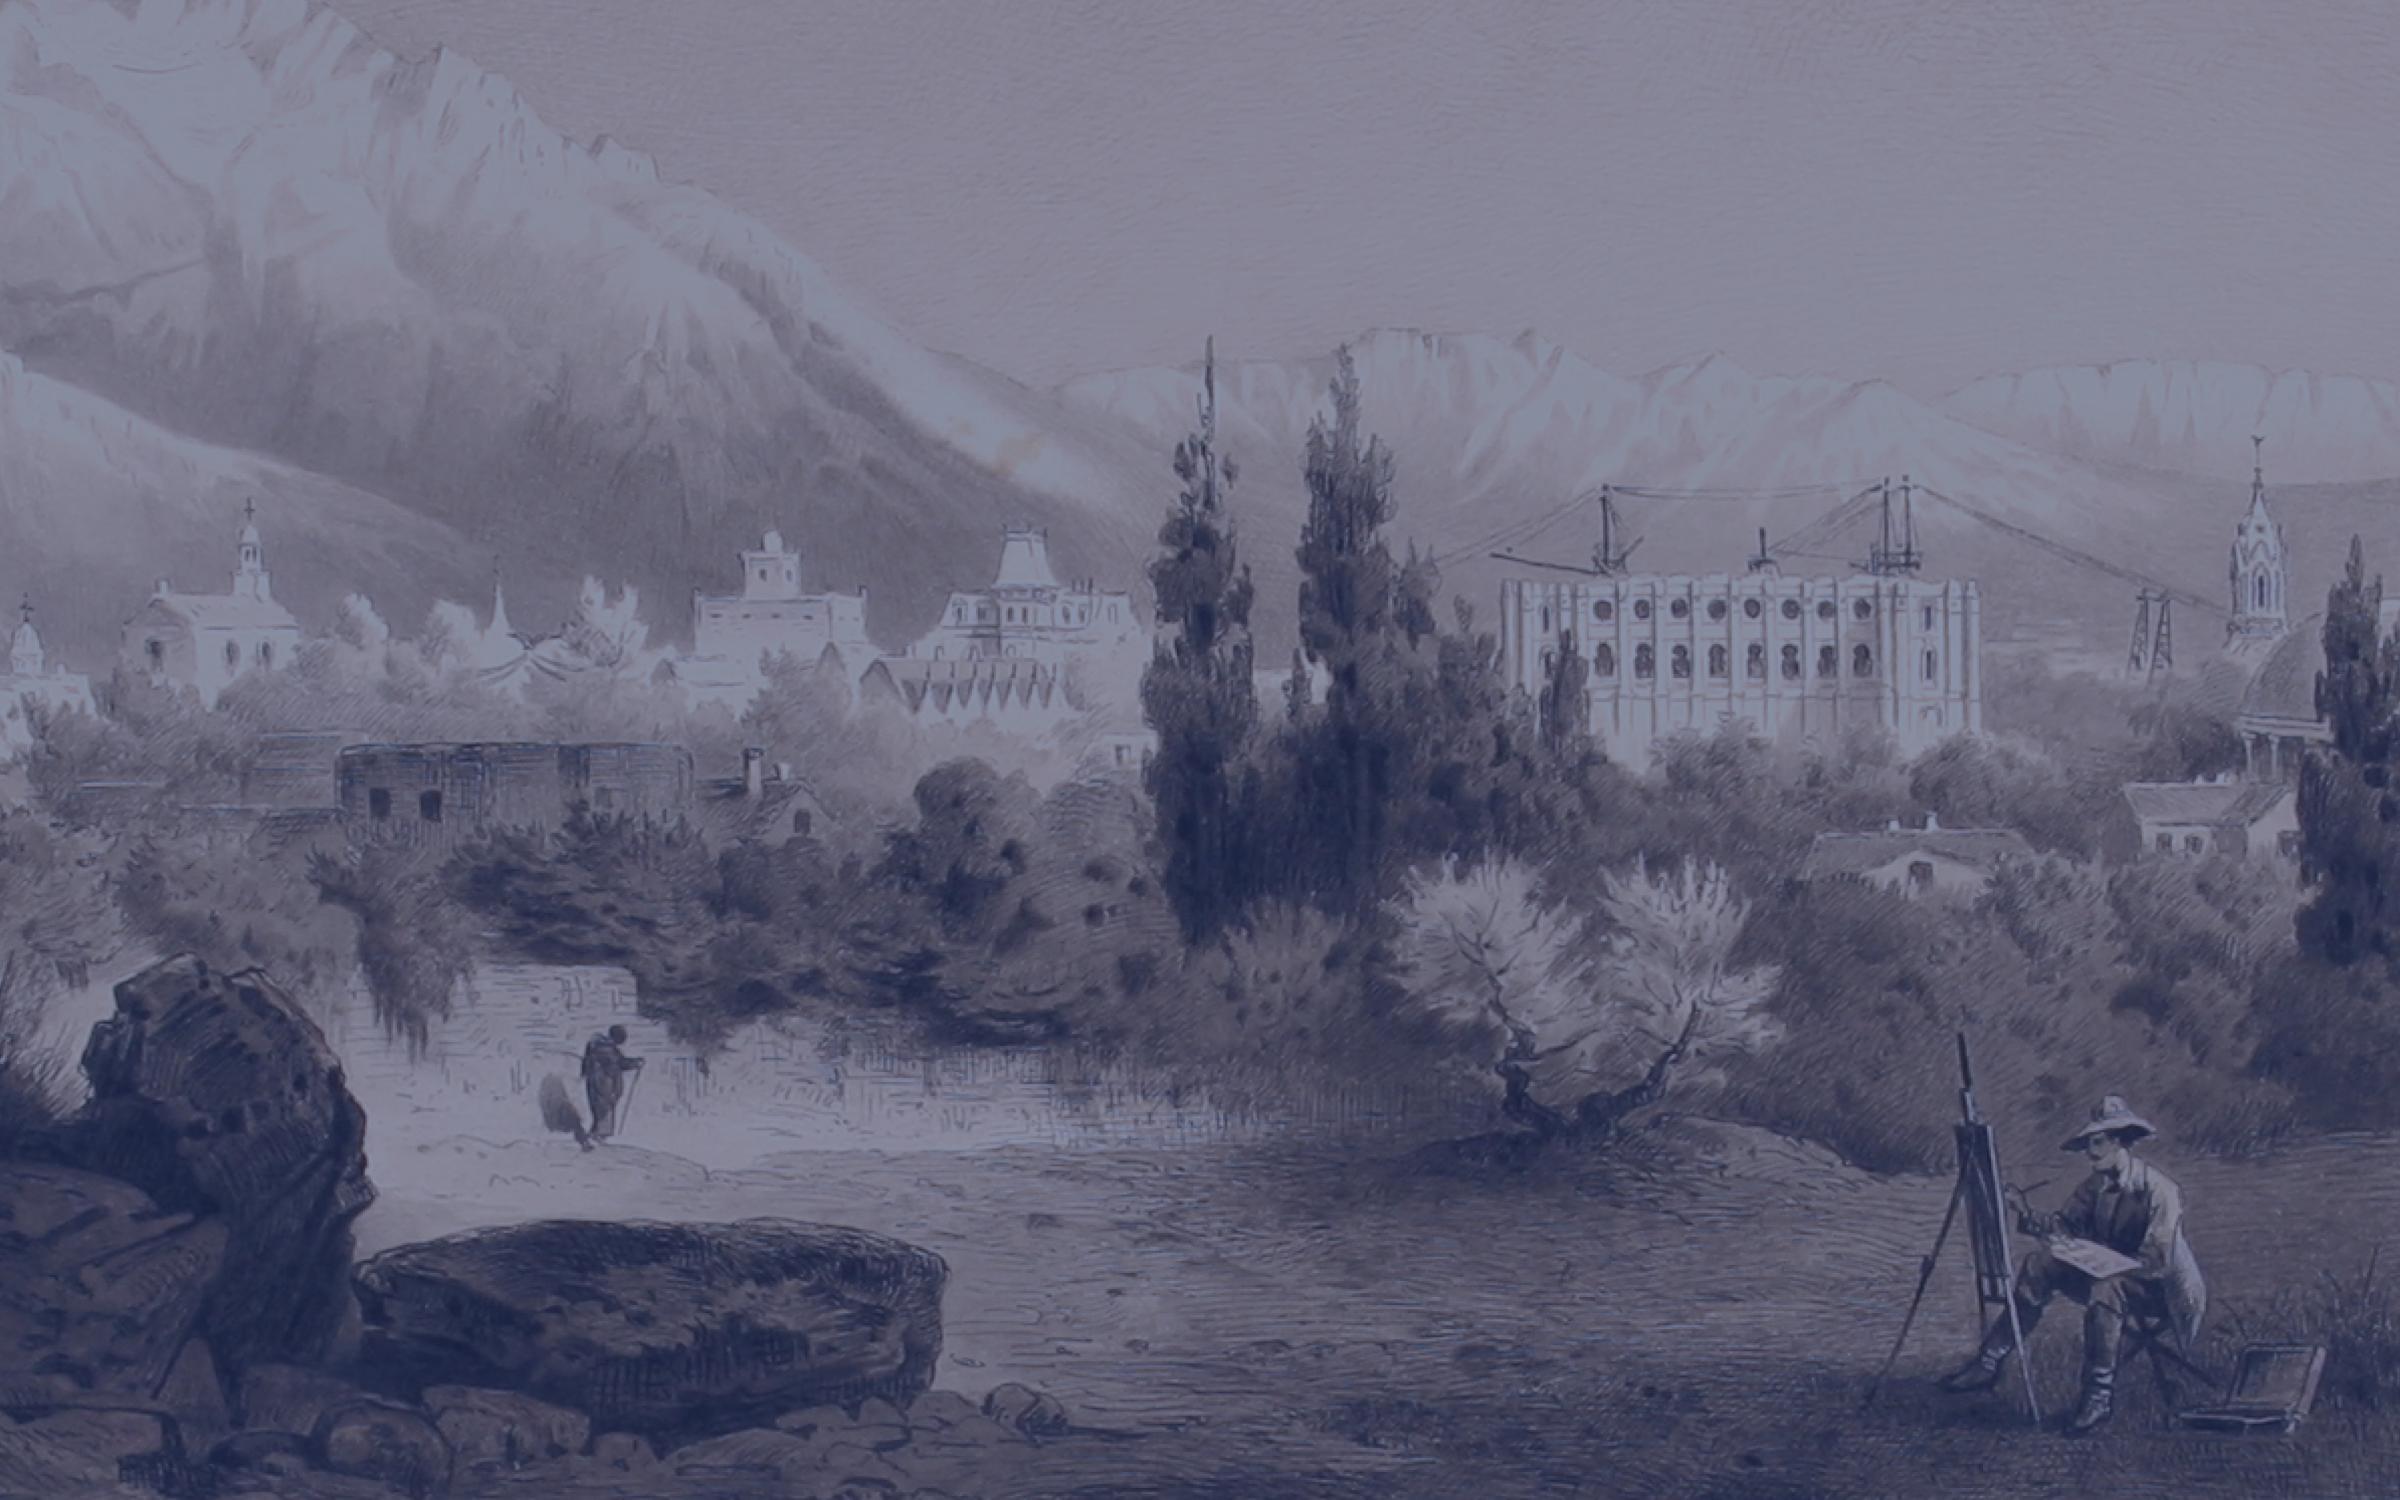 A black and white painting with a man painting of SLC